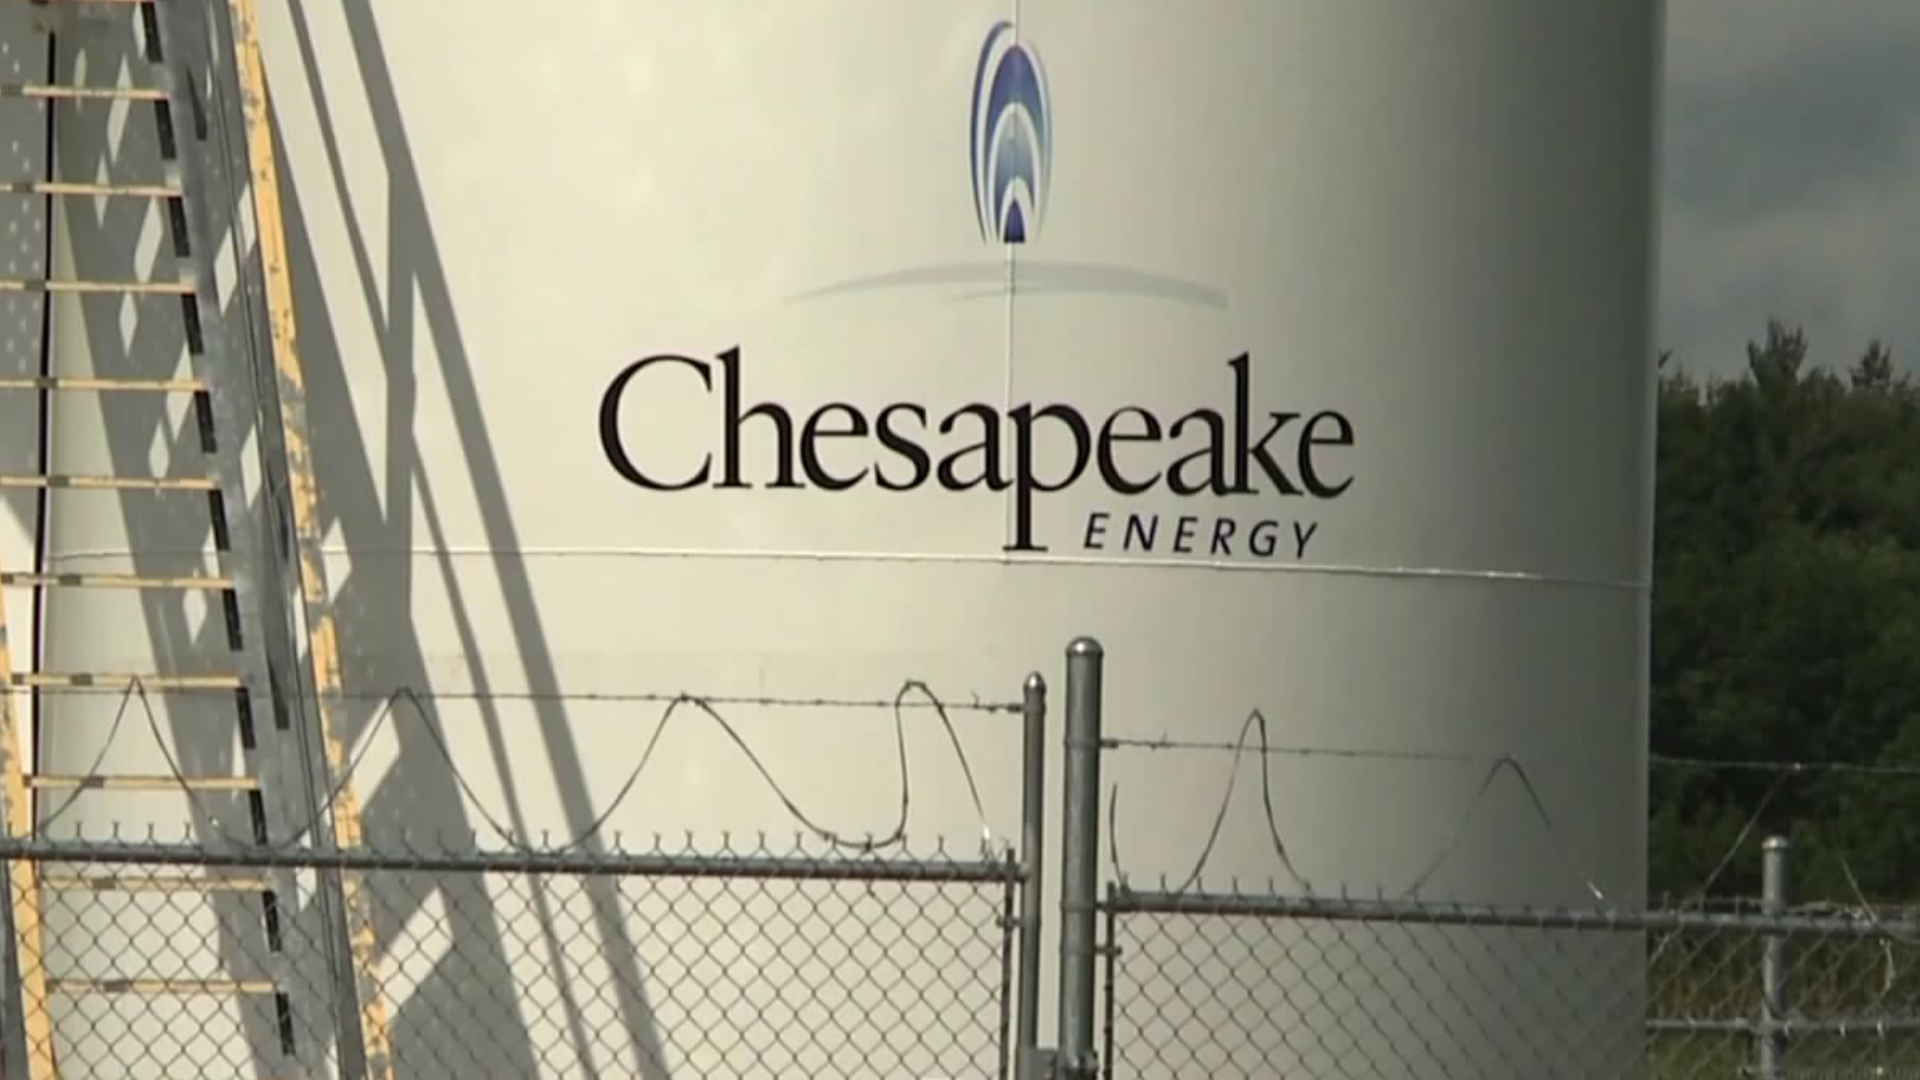 The natural gas company filed for Chapter 11 bankruptcy on Sunday.